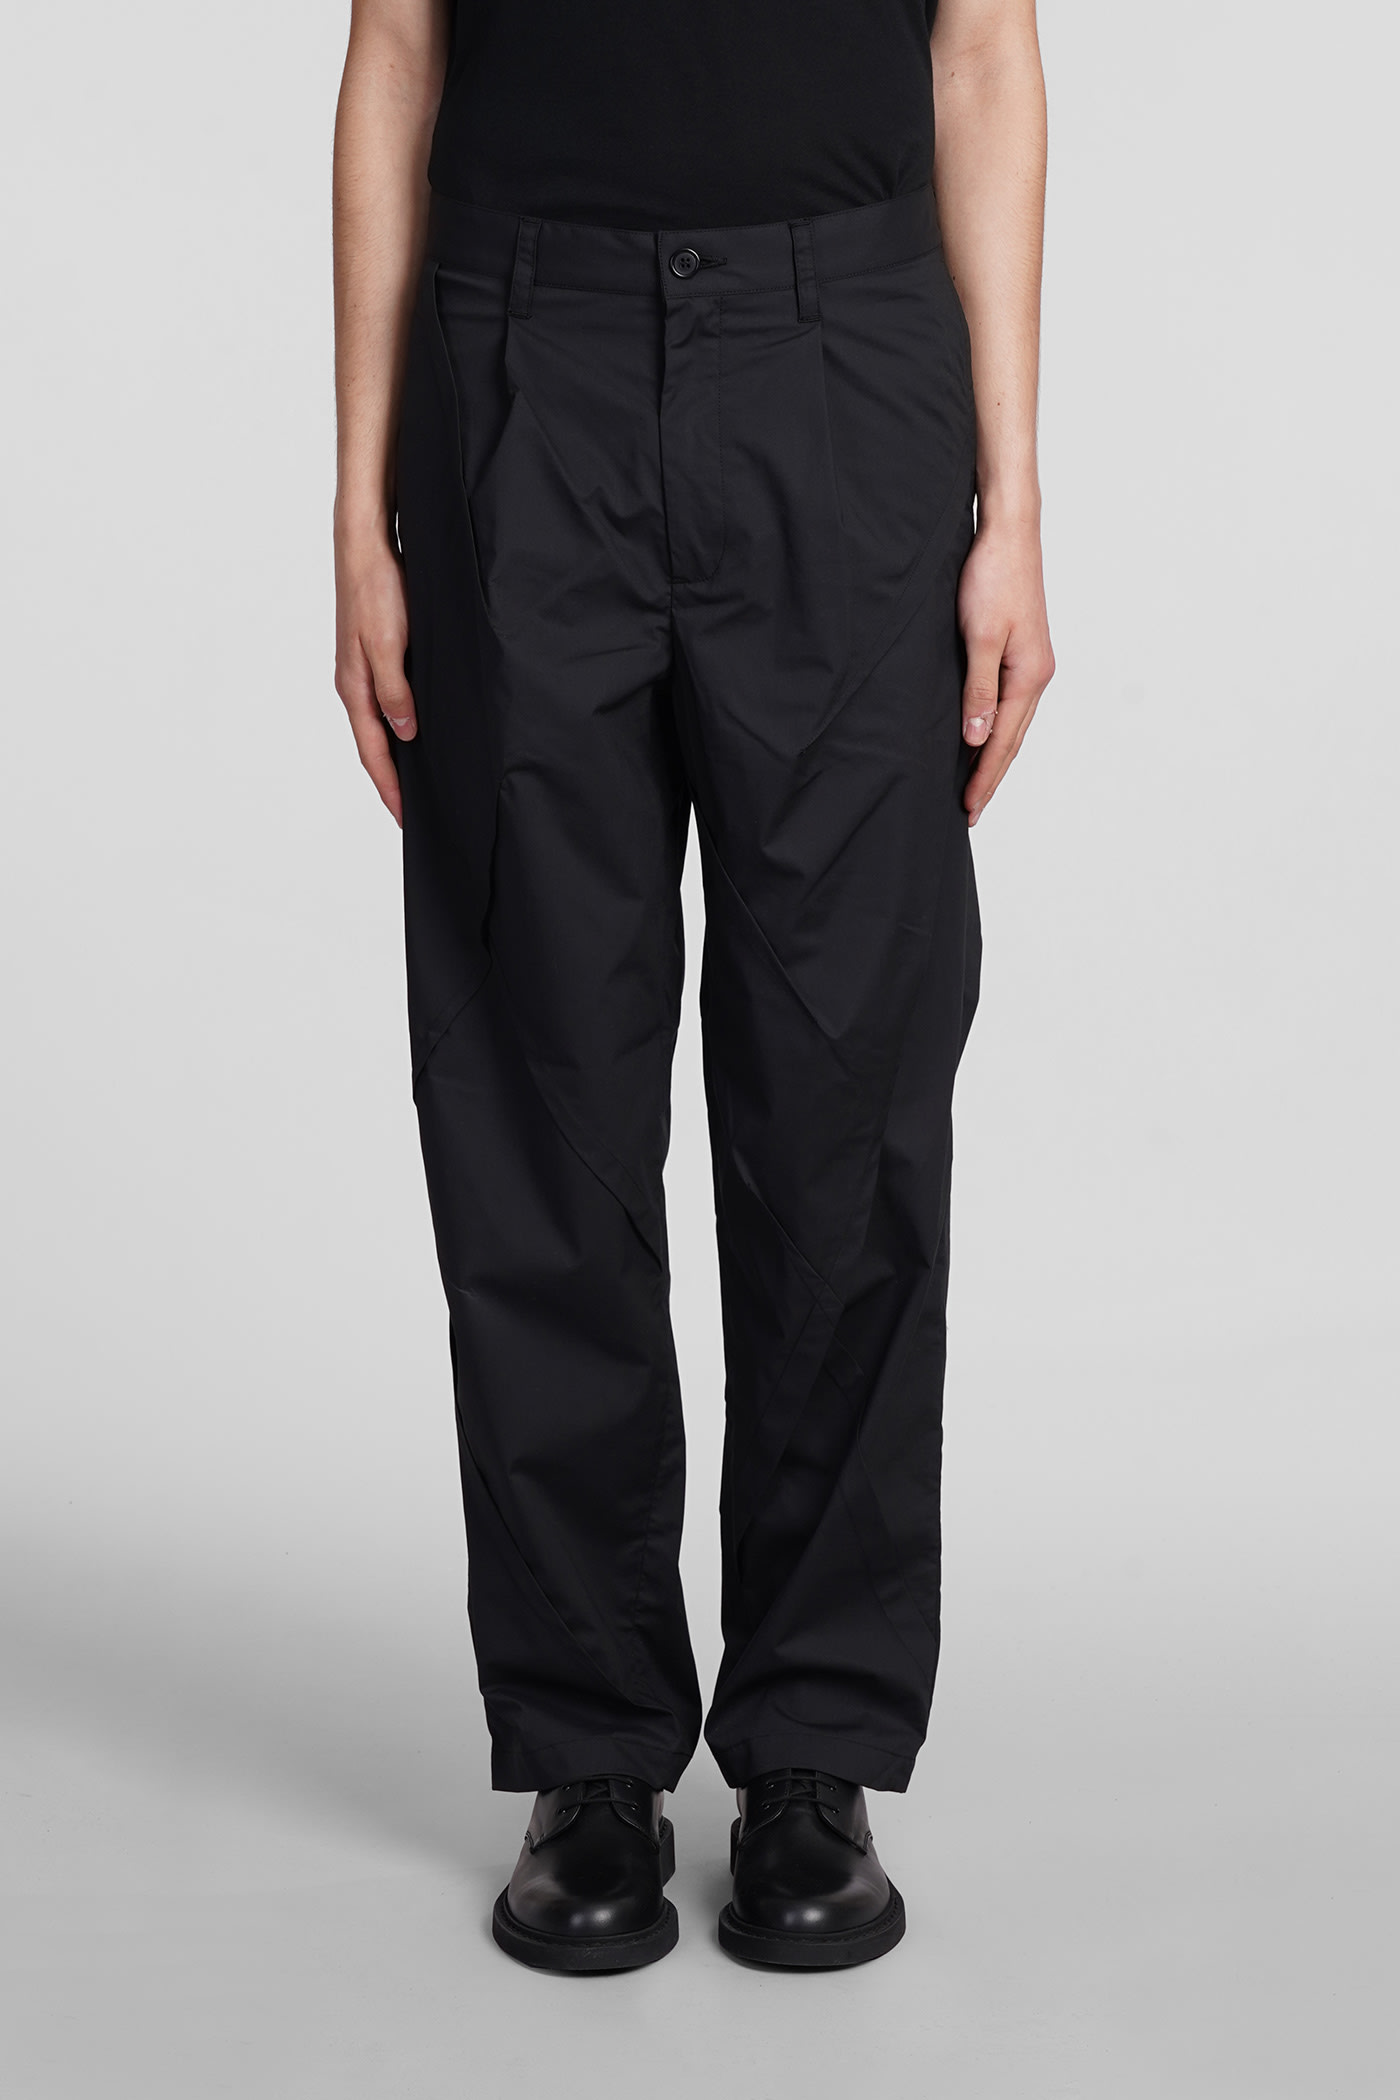 Pants In Black Polyester